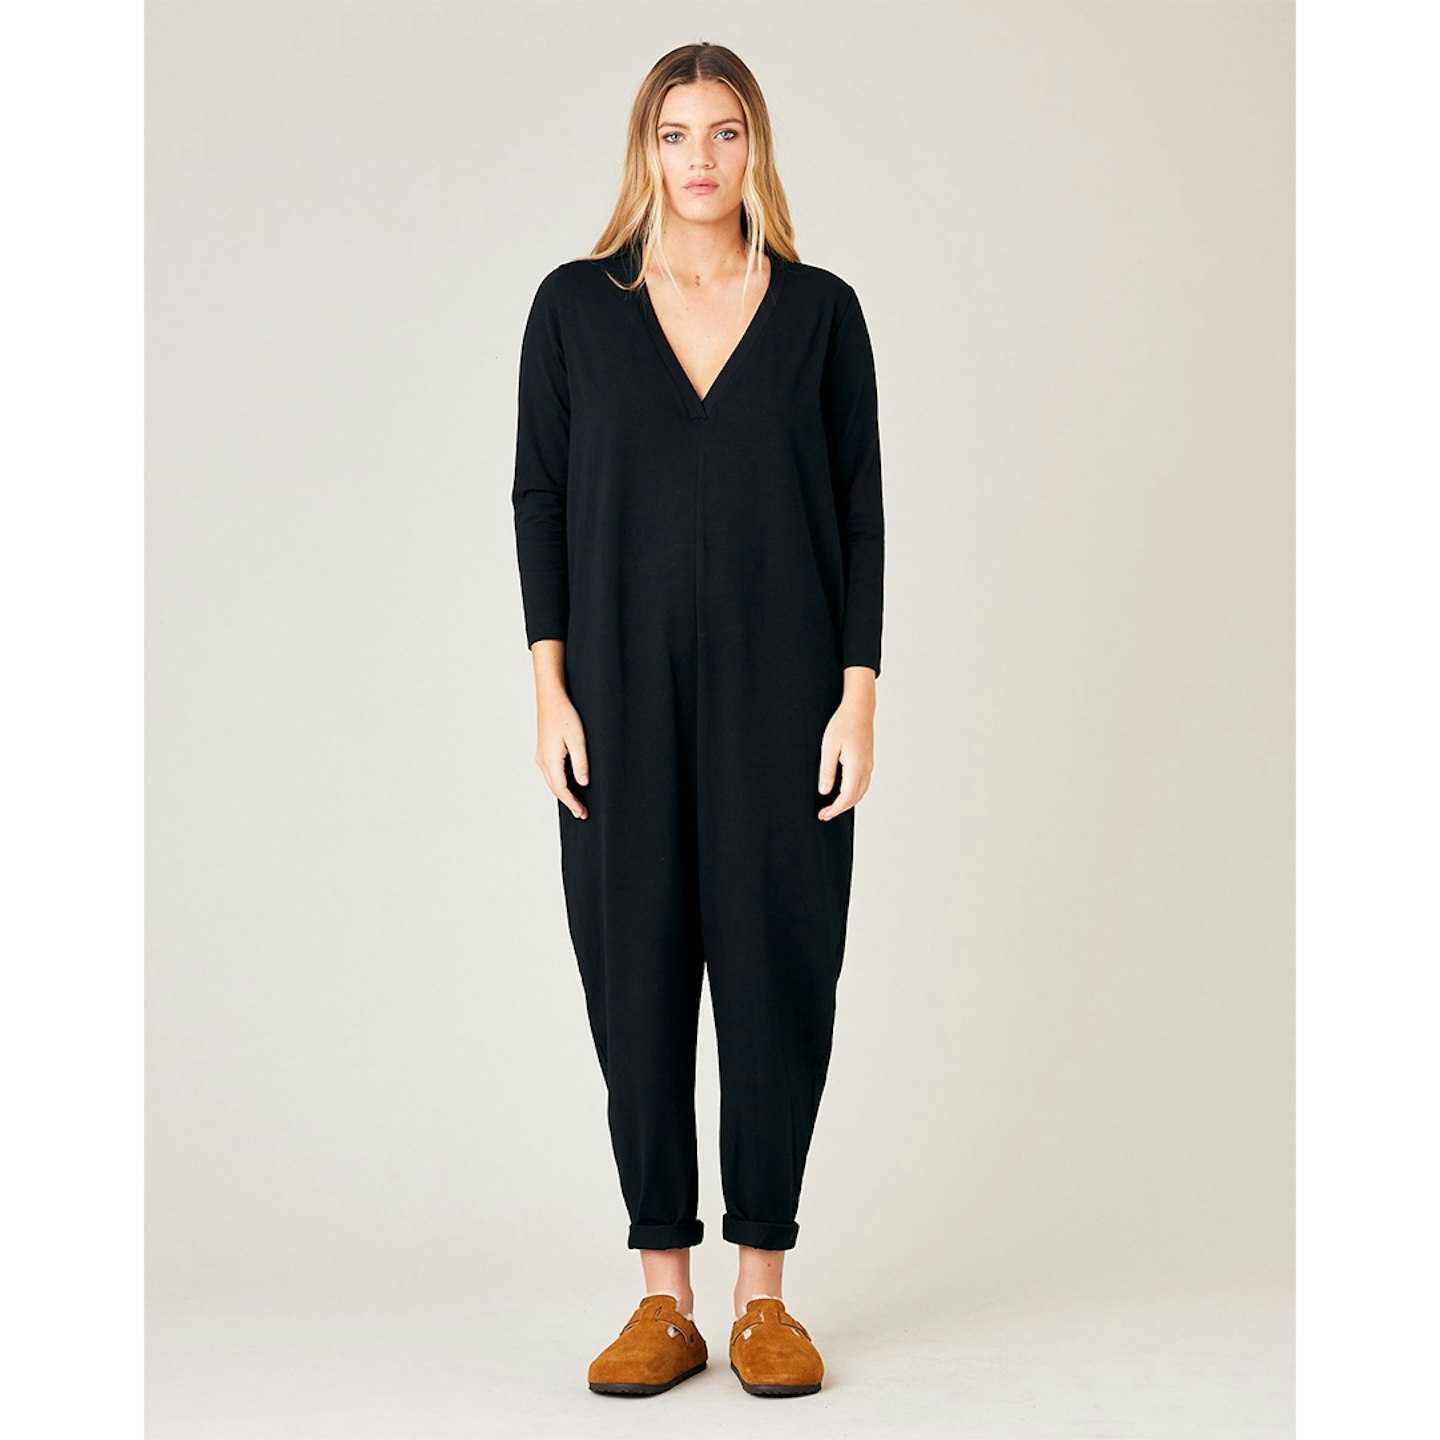 MILLY BLACK COTTON JERSEY